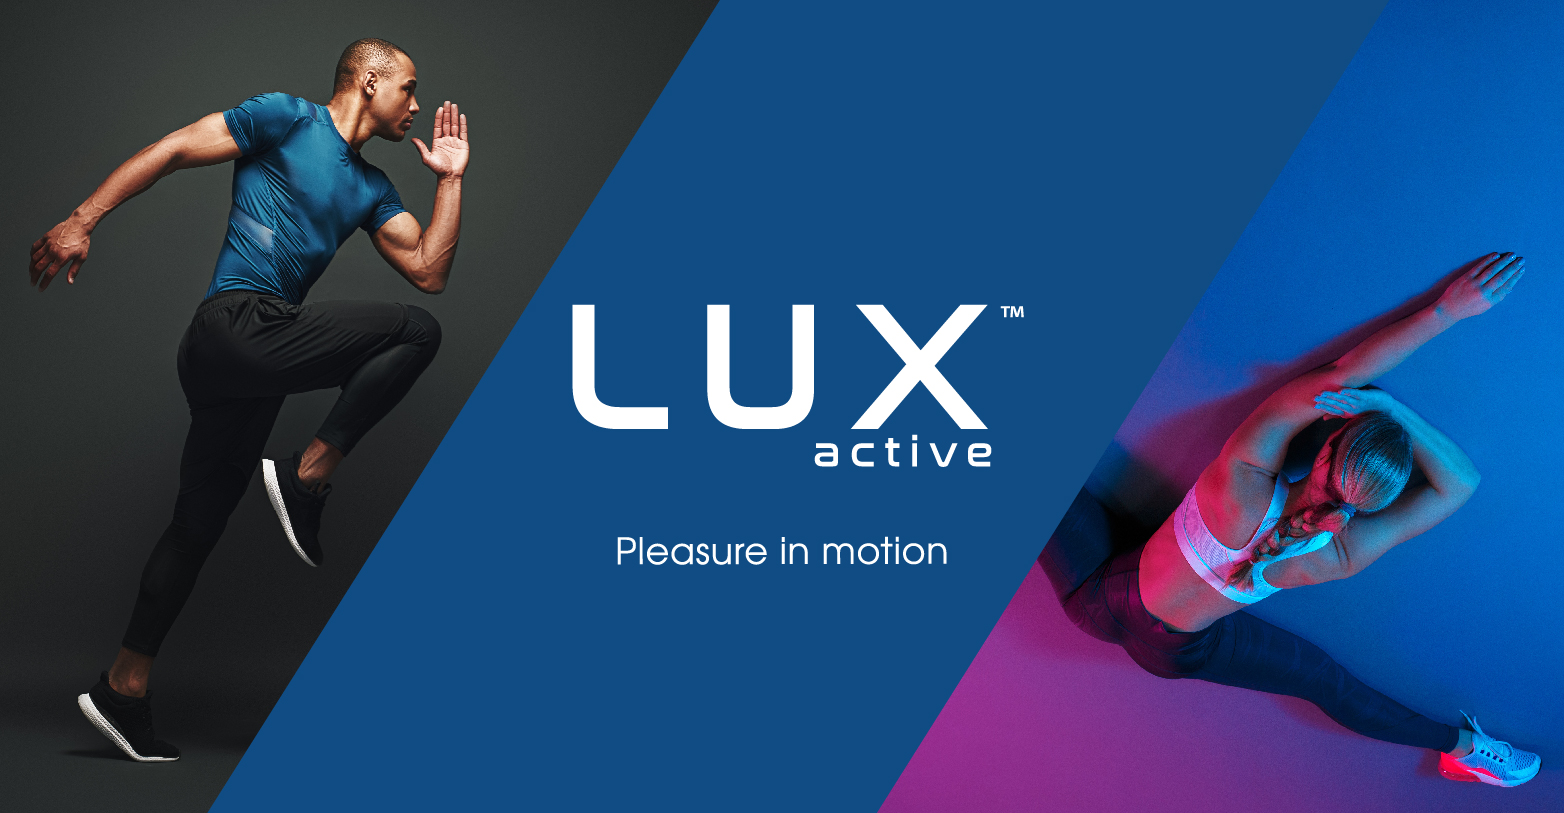 Lux for Men